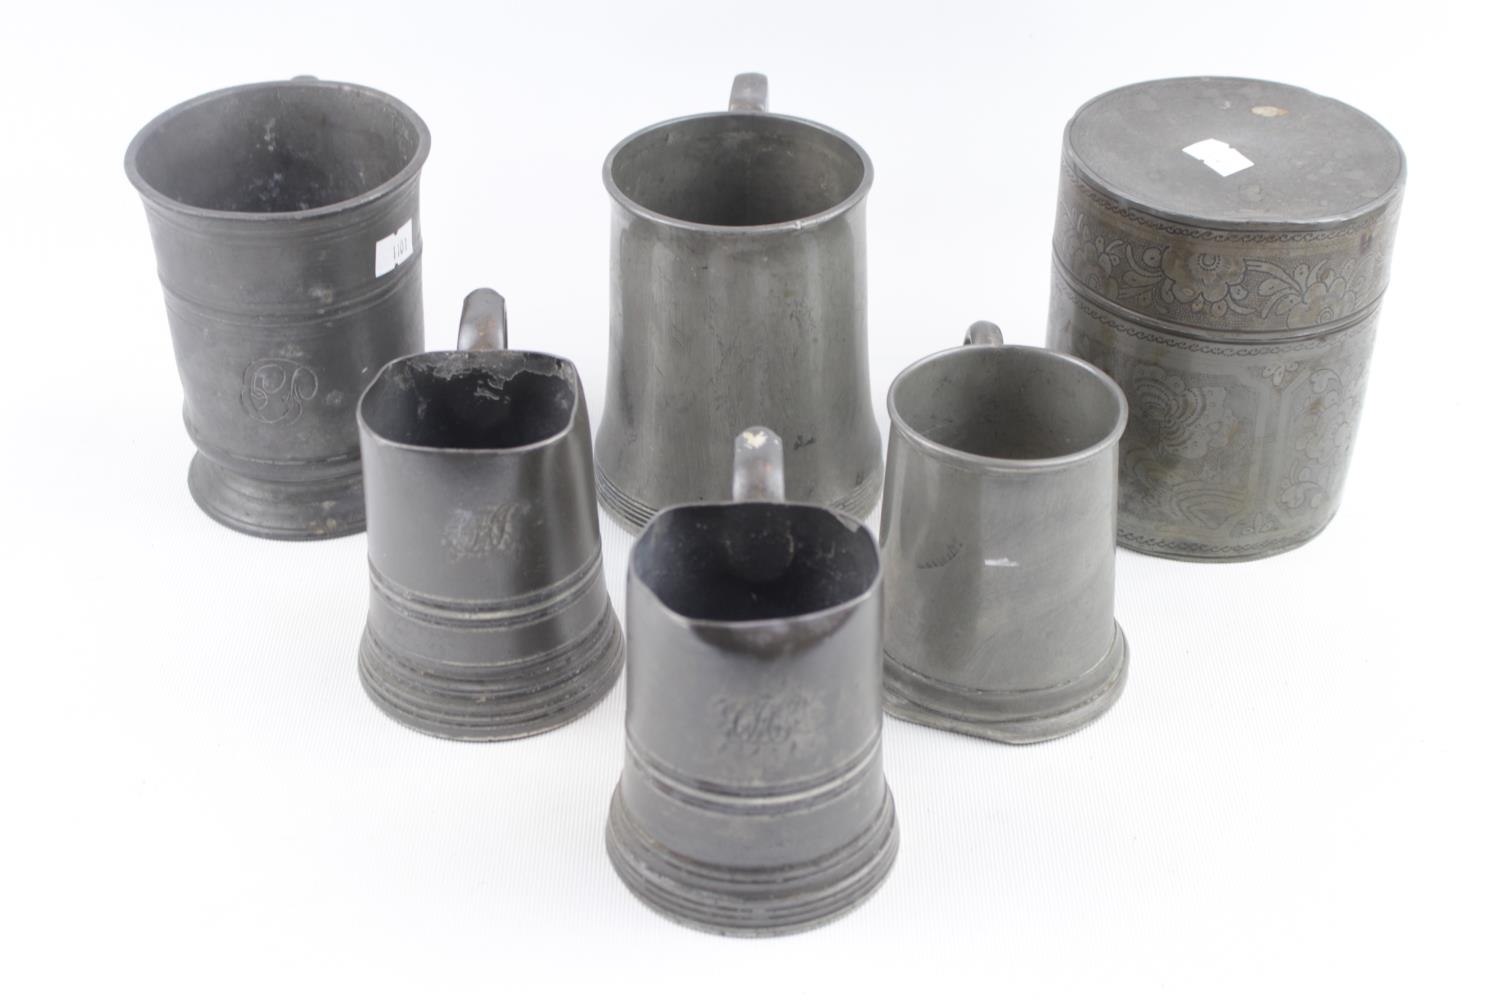 Collection of Pewter Tankards and a Pewter Lidded Tea caddy with engraved decoration